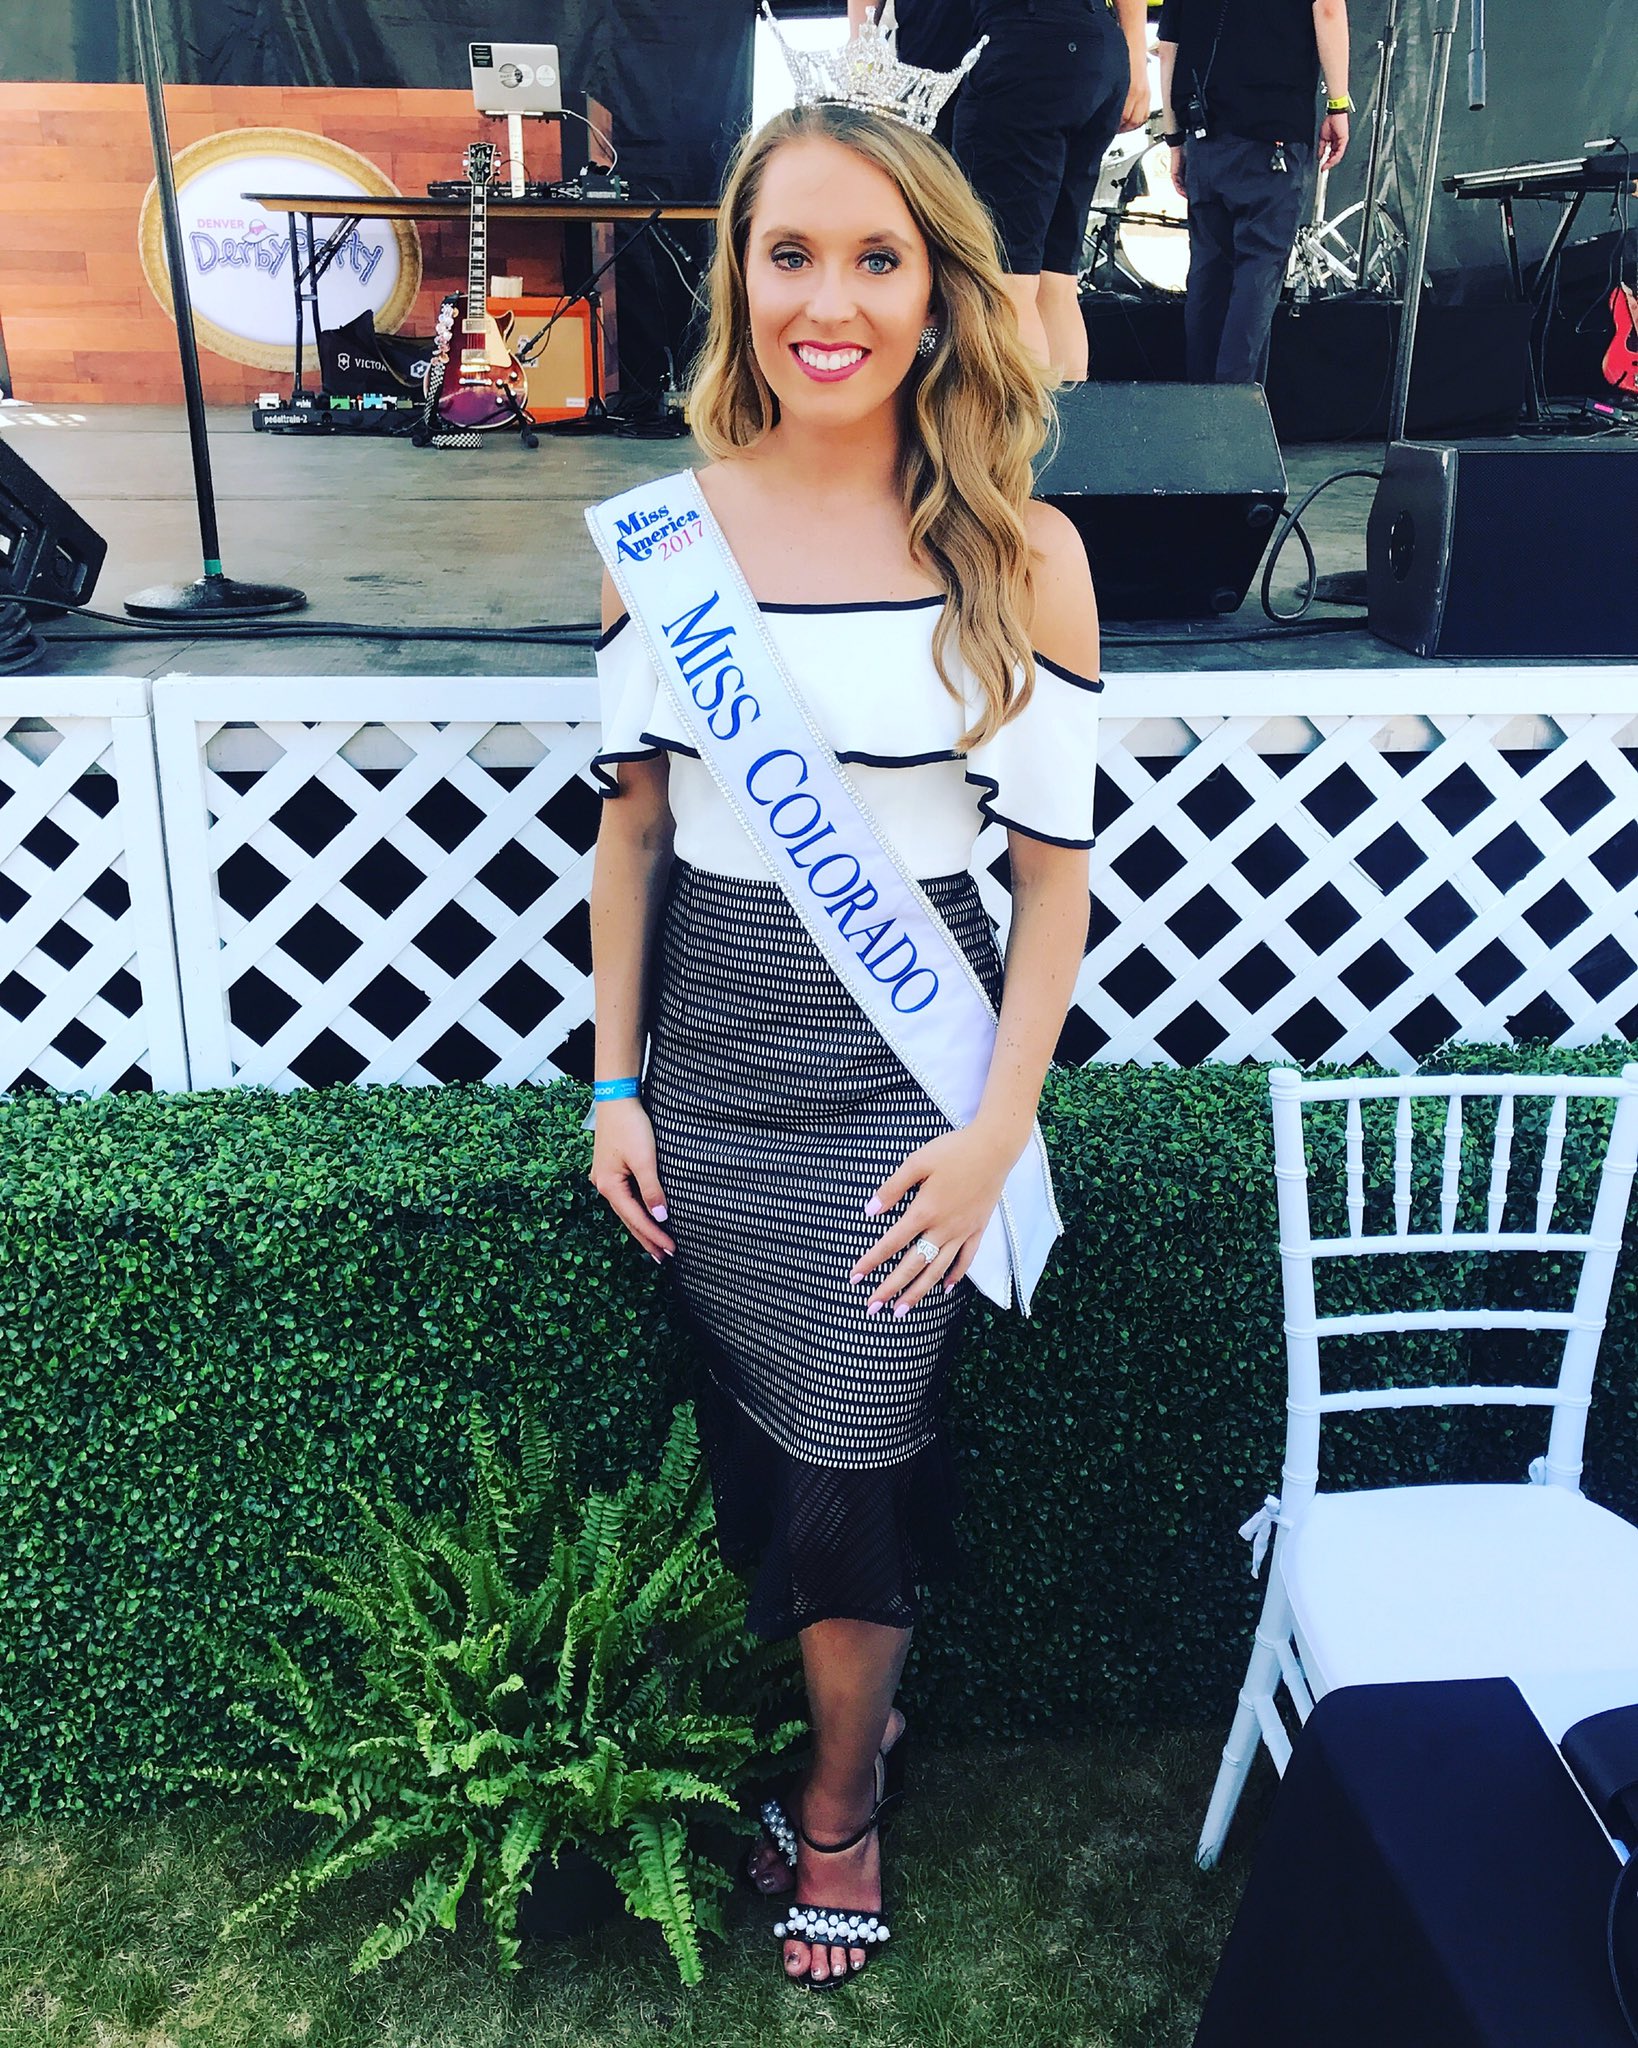 Miss Colorado On Twitter Yesterday Was So Much Fun At The